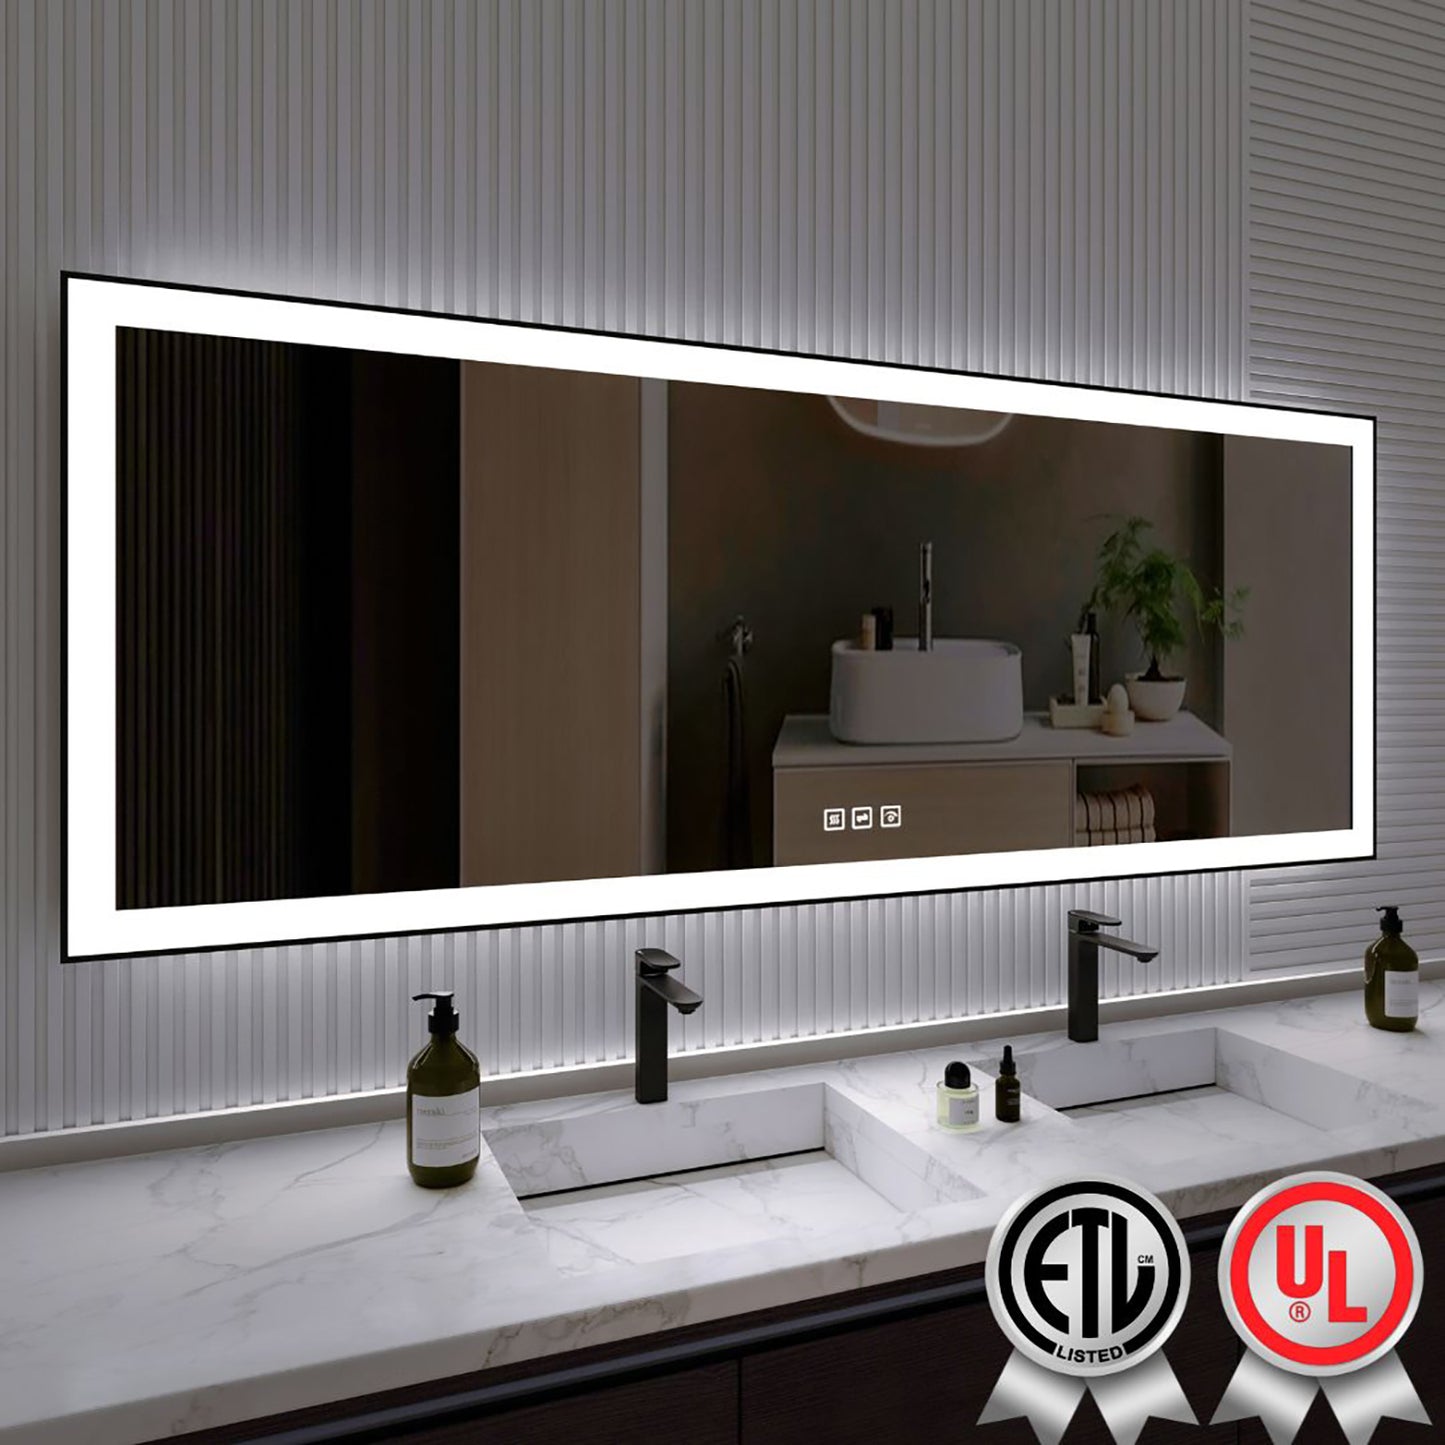 Waterpar® 84 in. W x 32 in. H Rectangular Framed Anti-Fog LED Wall Bathroom Vanity Mirror in Black with Backlit and Front Light